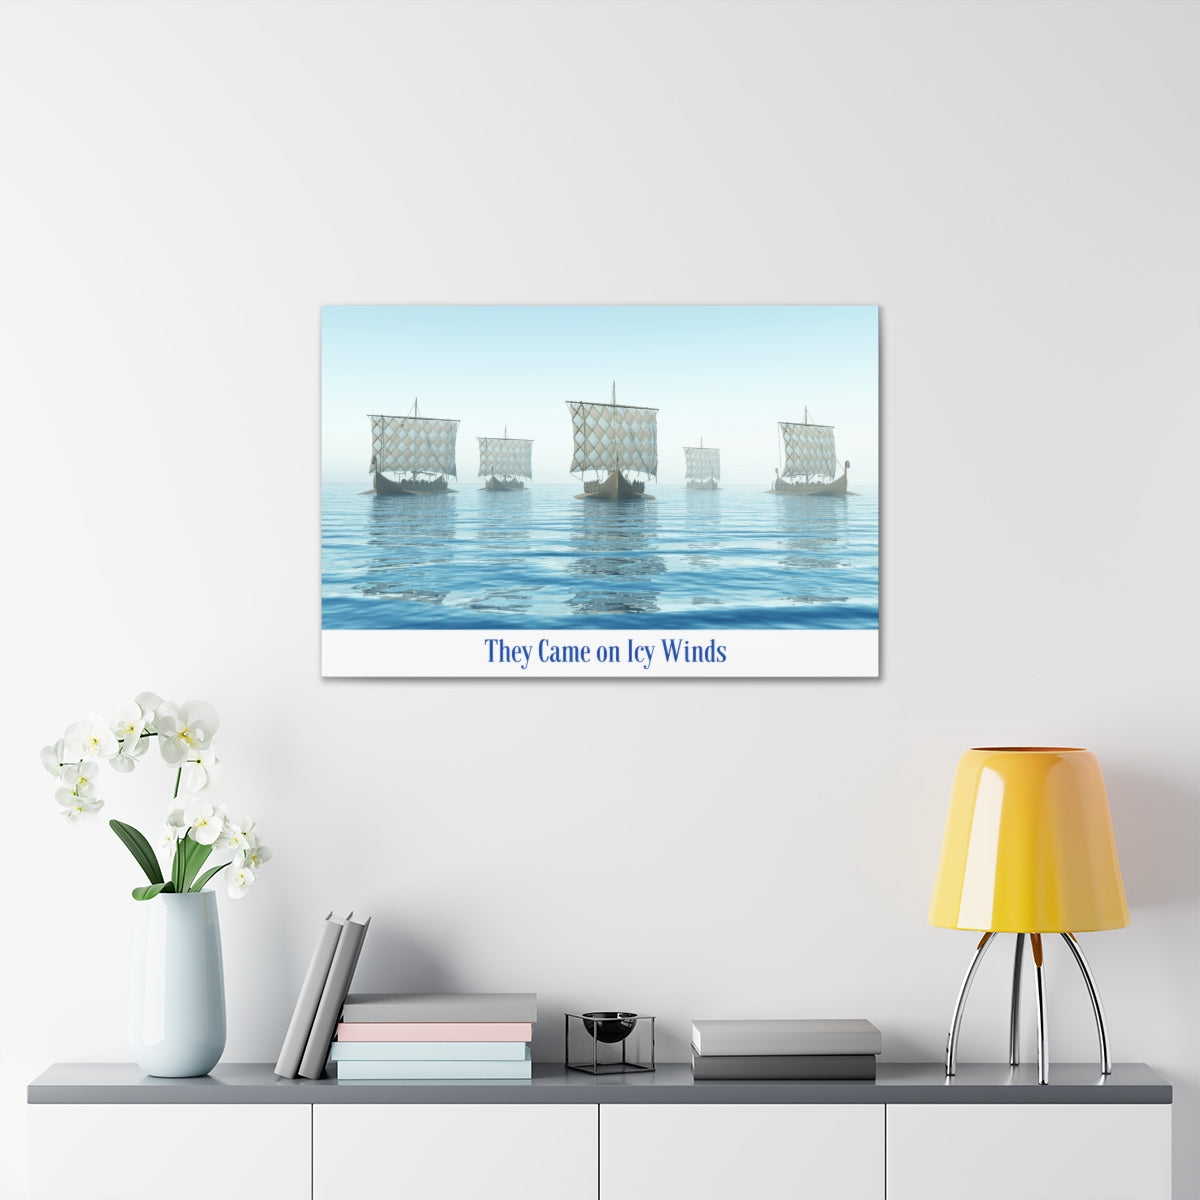 Viking Art on Canvas - &quot;They Came on Icy Winds&quot;